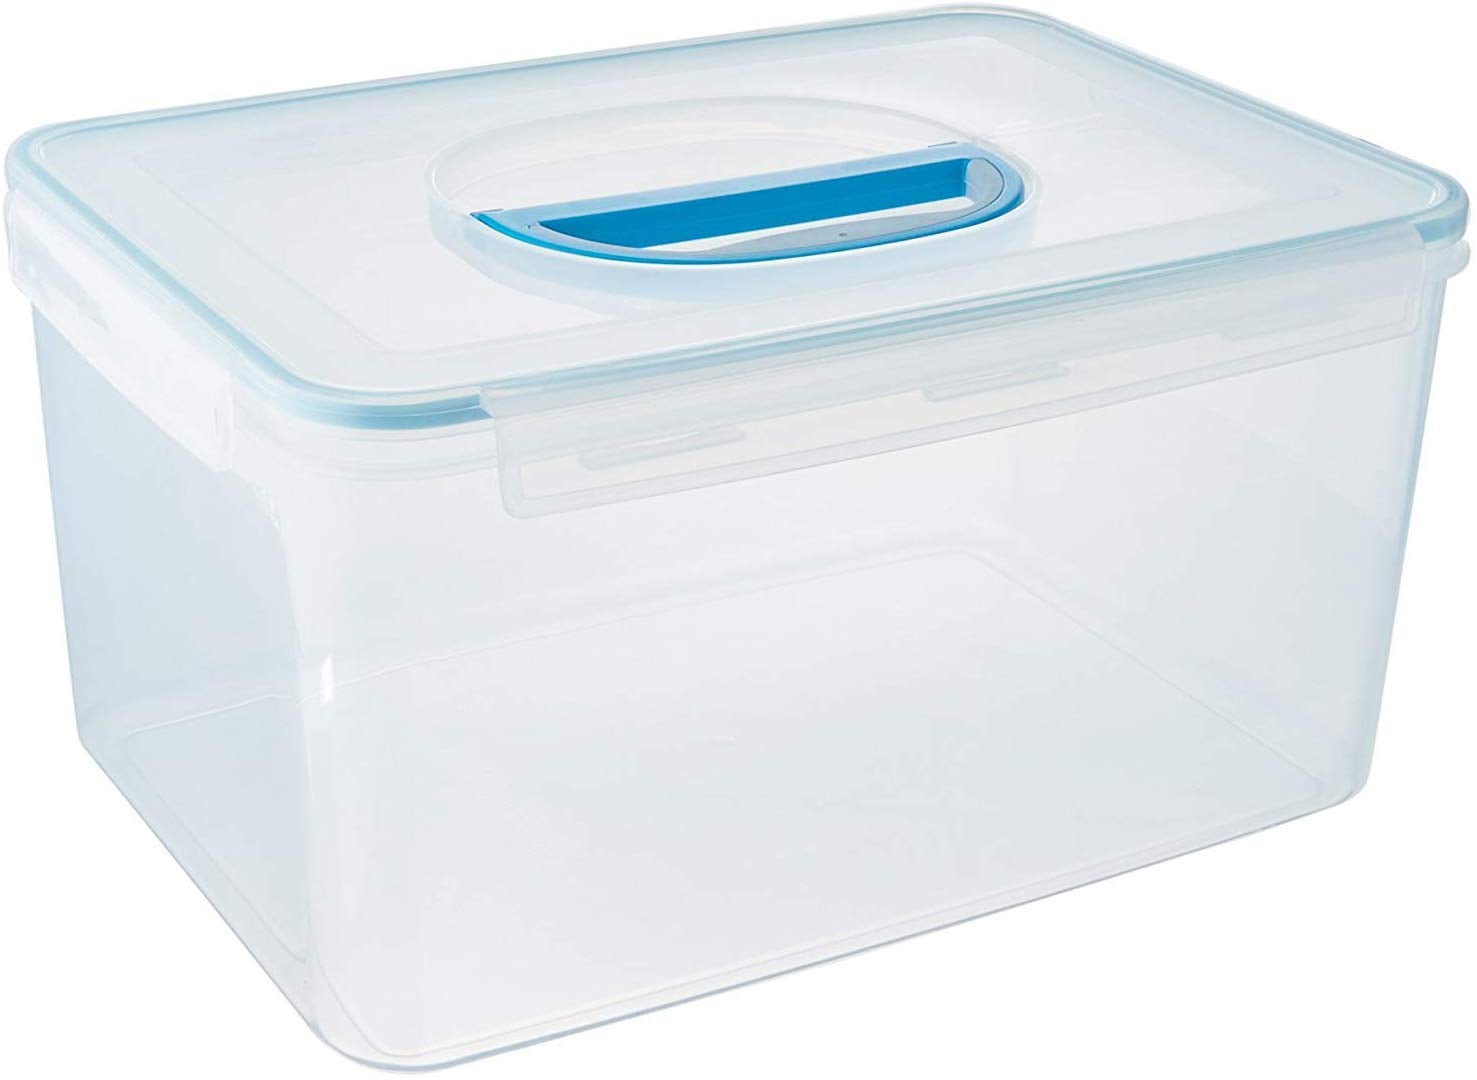 Komax Biokips Extra Large Food Storage Container (48.6-Cups) 